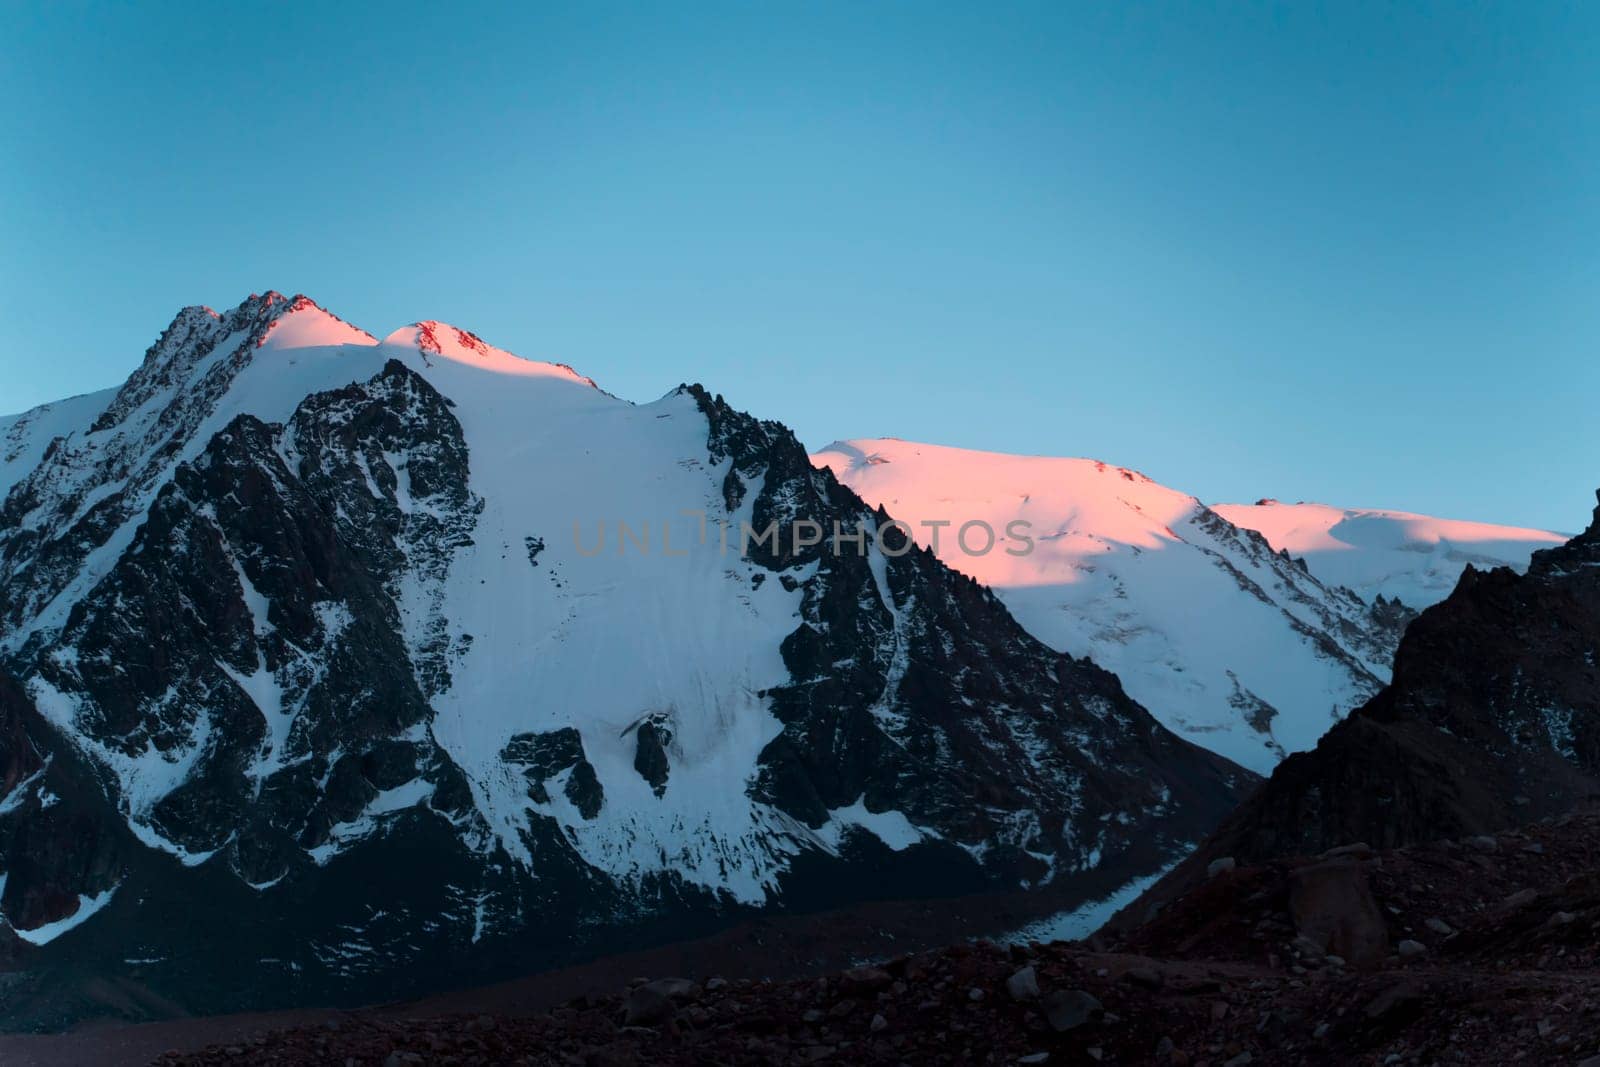 Stunning majestic landscape with snow-capped mountains and glaciers in the last rays of the sun at sunset.